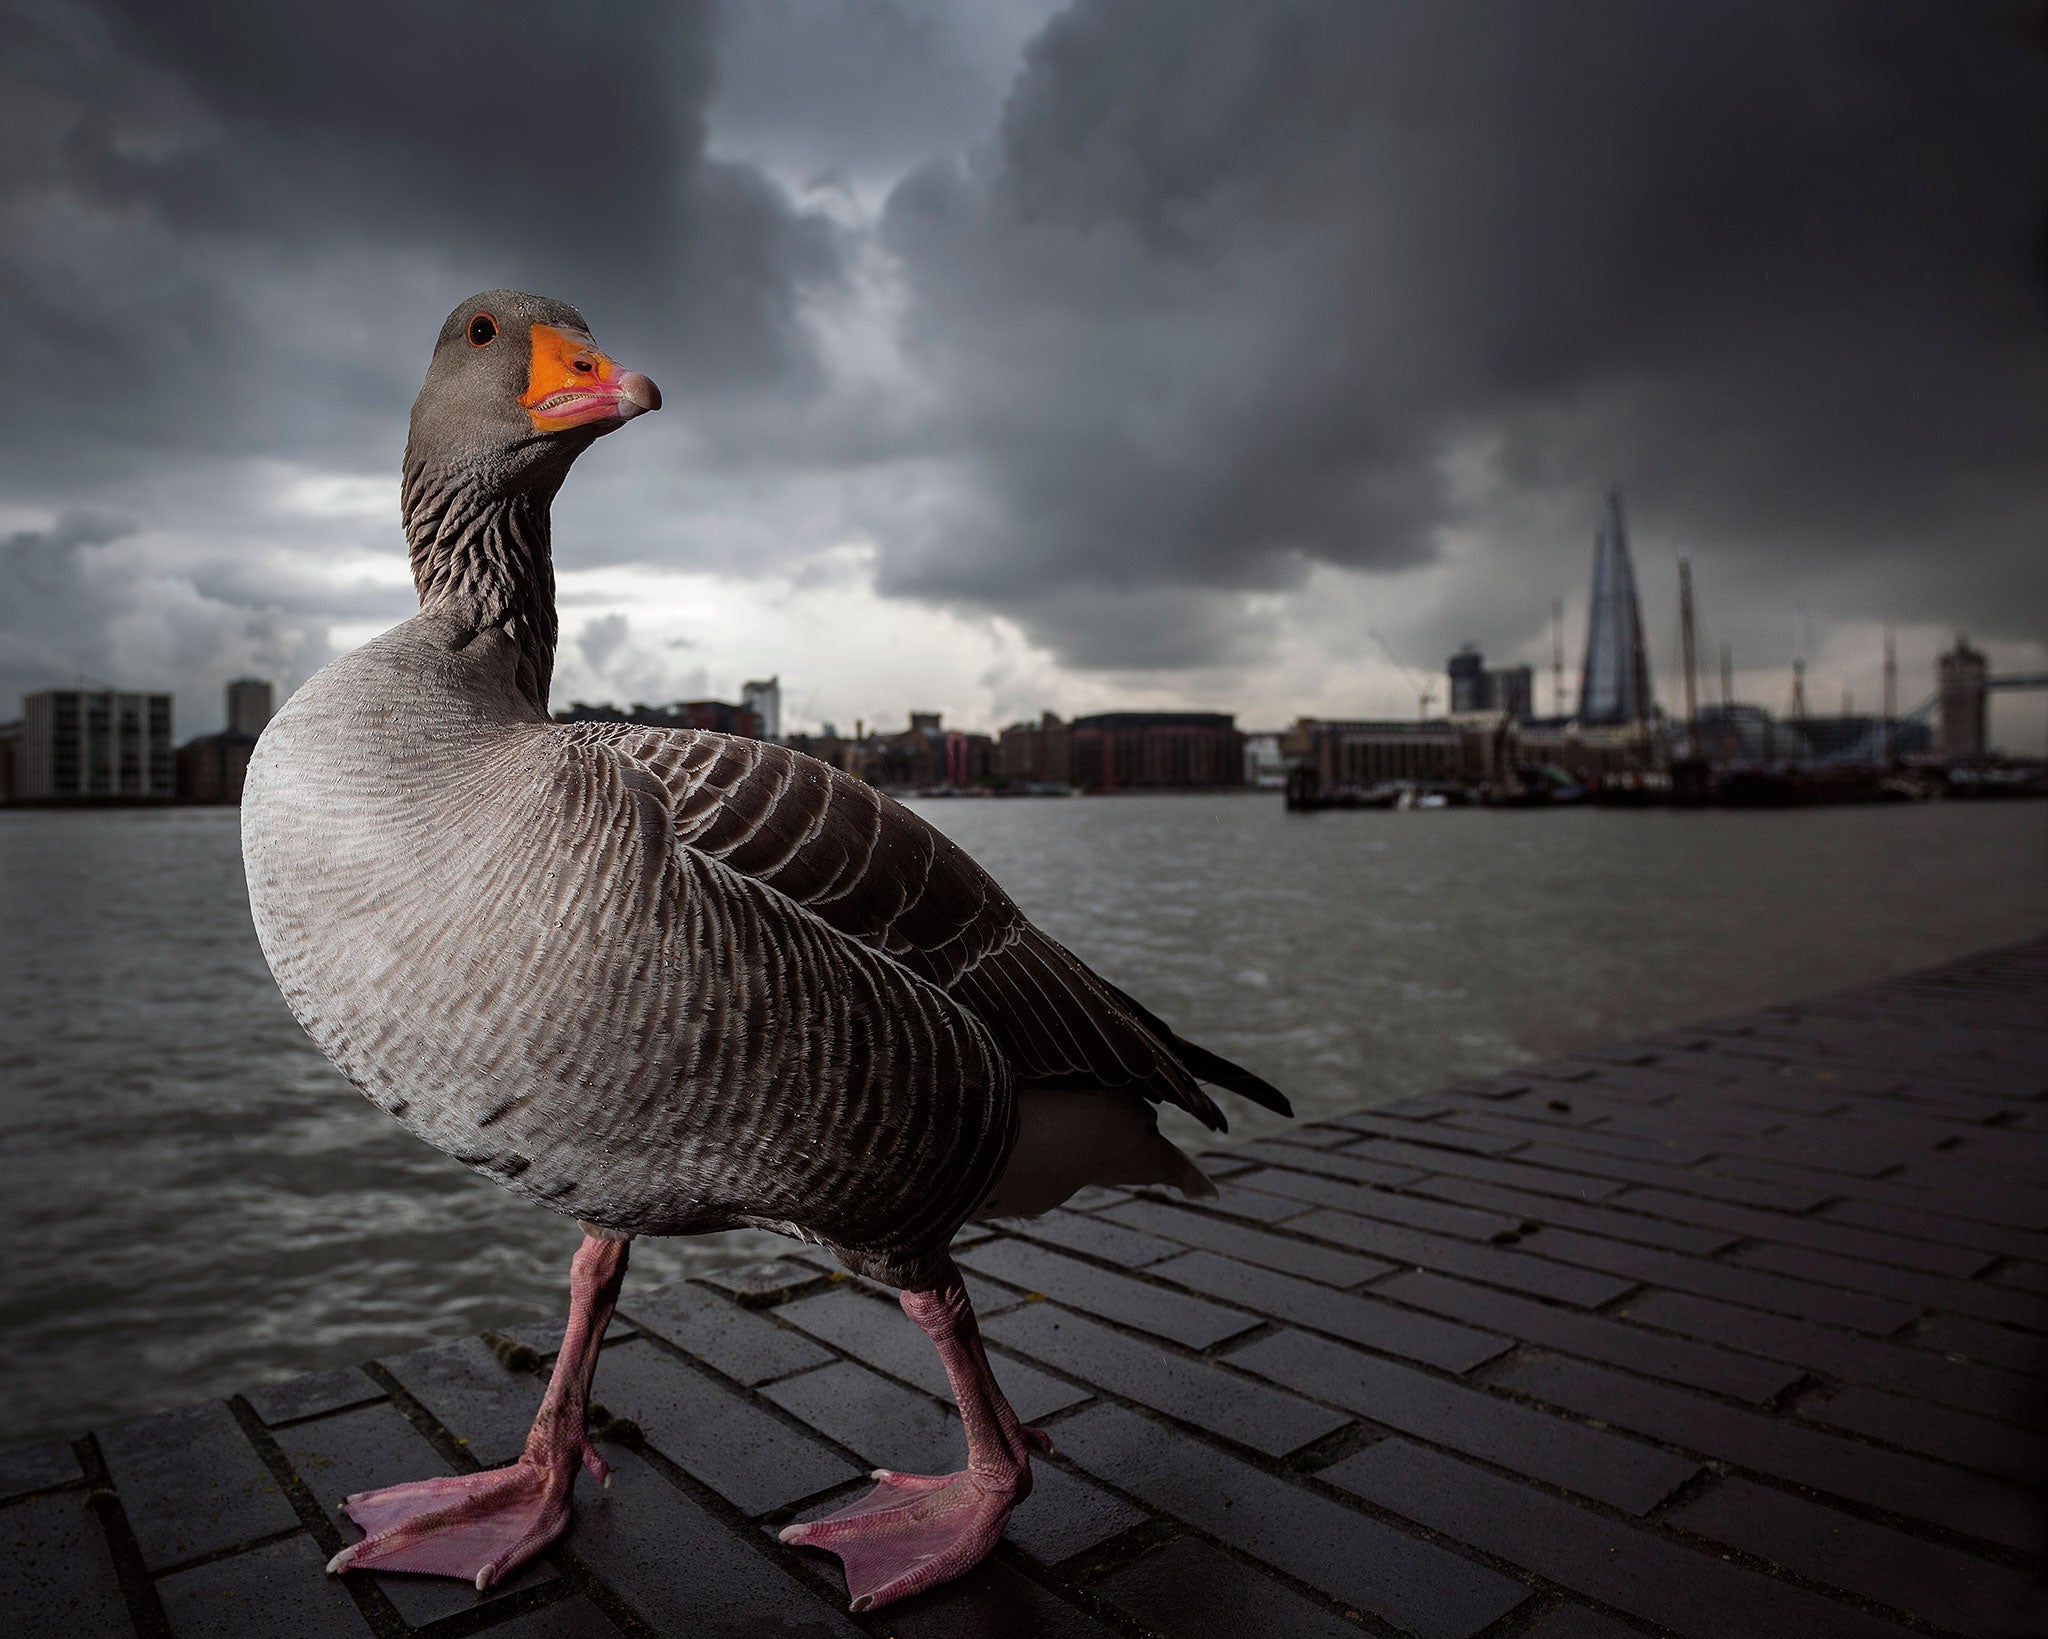 'Urban Tourist (Grayling Goose)' by Lee Acaster won top prize at the British Wildlife Photography Awards 2014